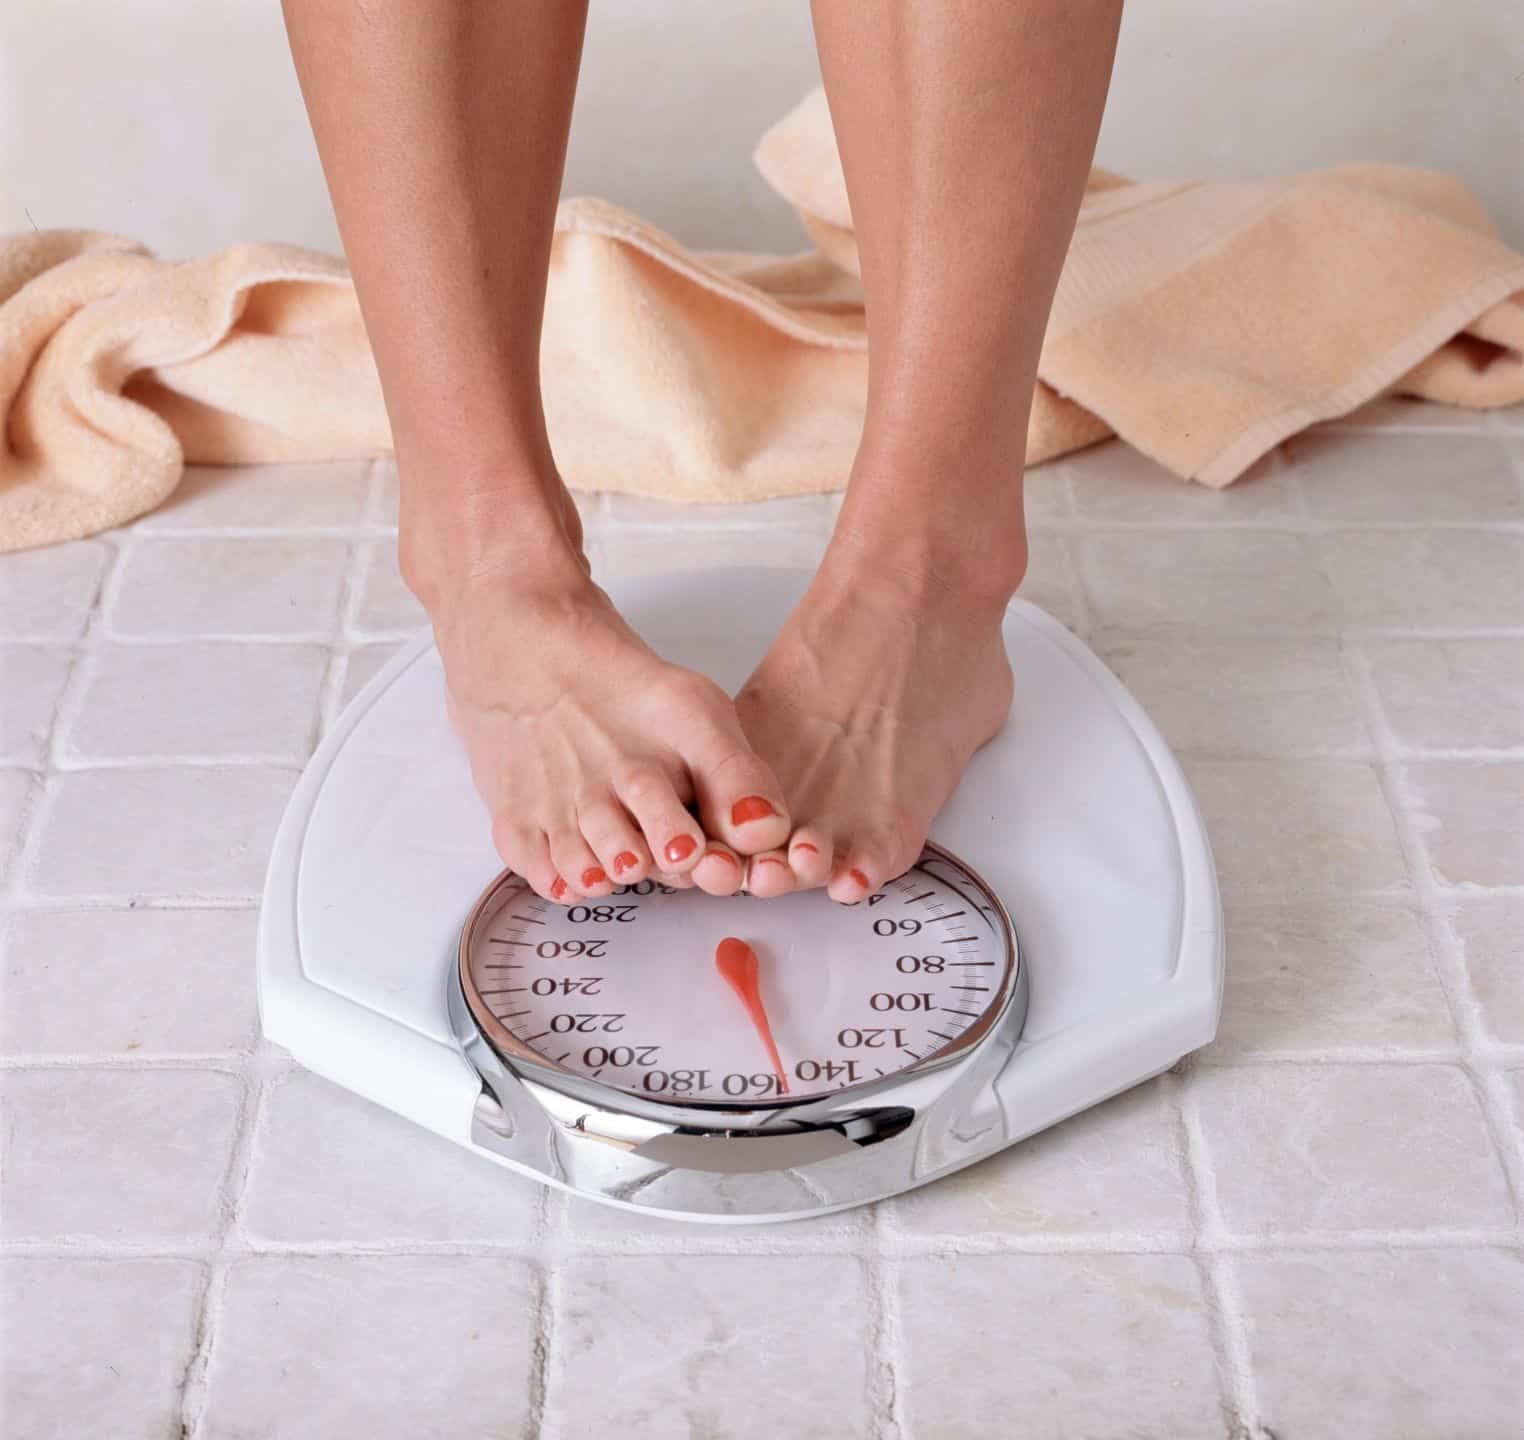 Weight Loss services for adults and children in Downers grove